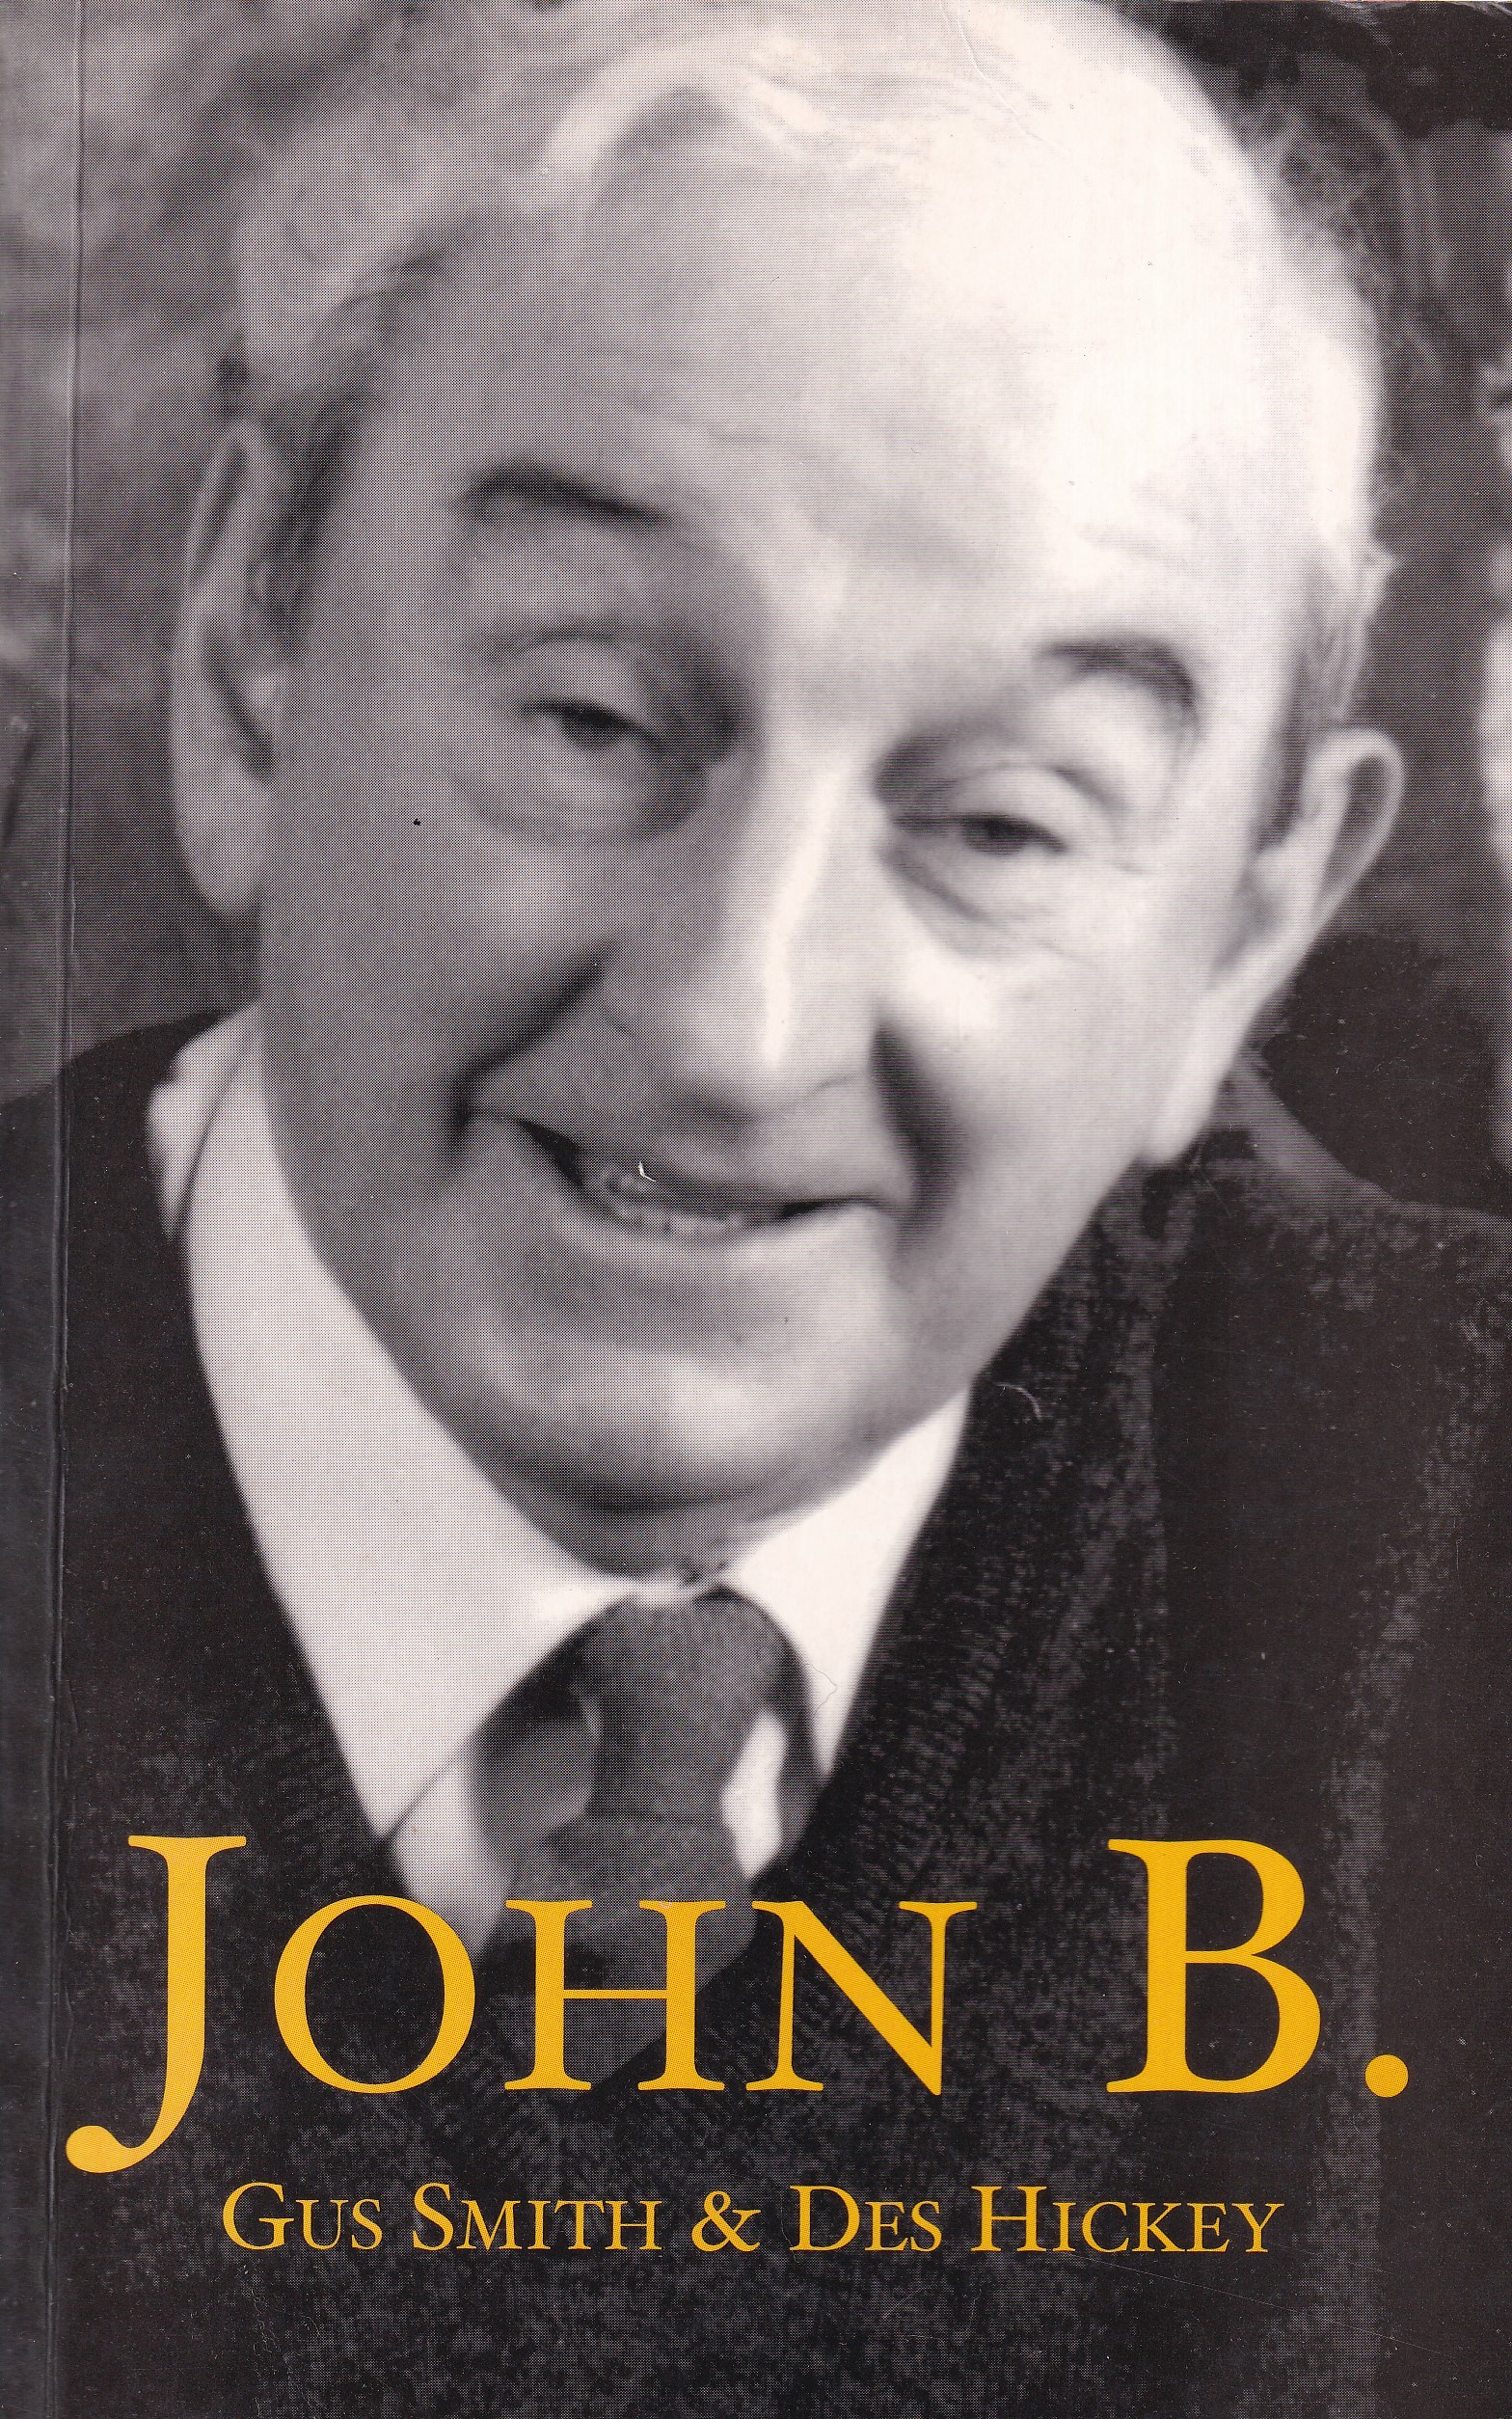 John B. by Gus Smith and Des Hickey